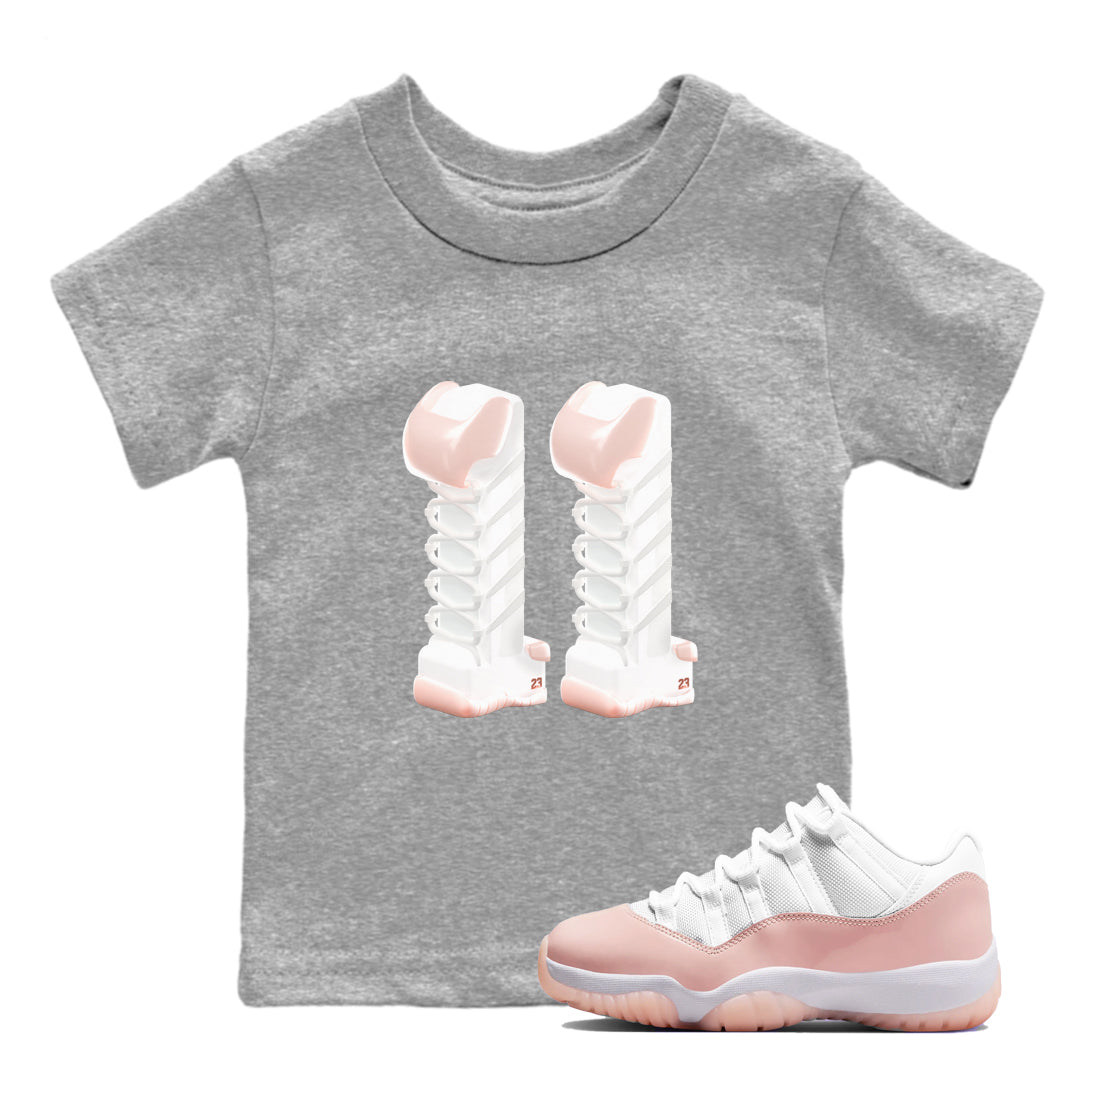 11s Legend Pink shirts to match jordans 3D Number 11 sneaker match tees Air Jordan 11 Legend Pink SNRT Sneaker Tees streetwear brand Baby and Youth Heather Grey 1 cotton tee